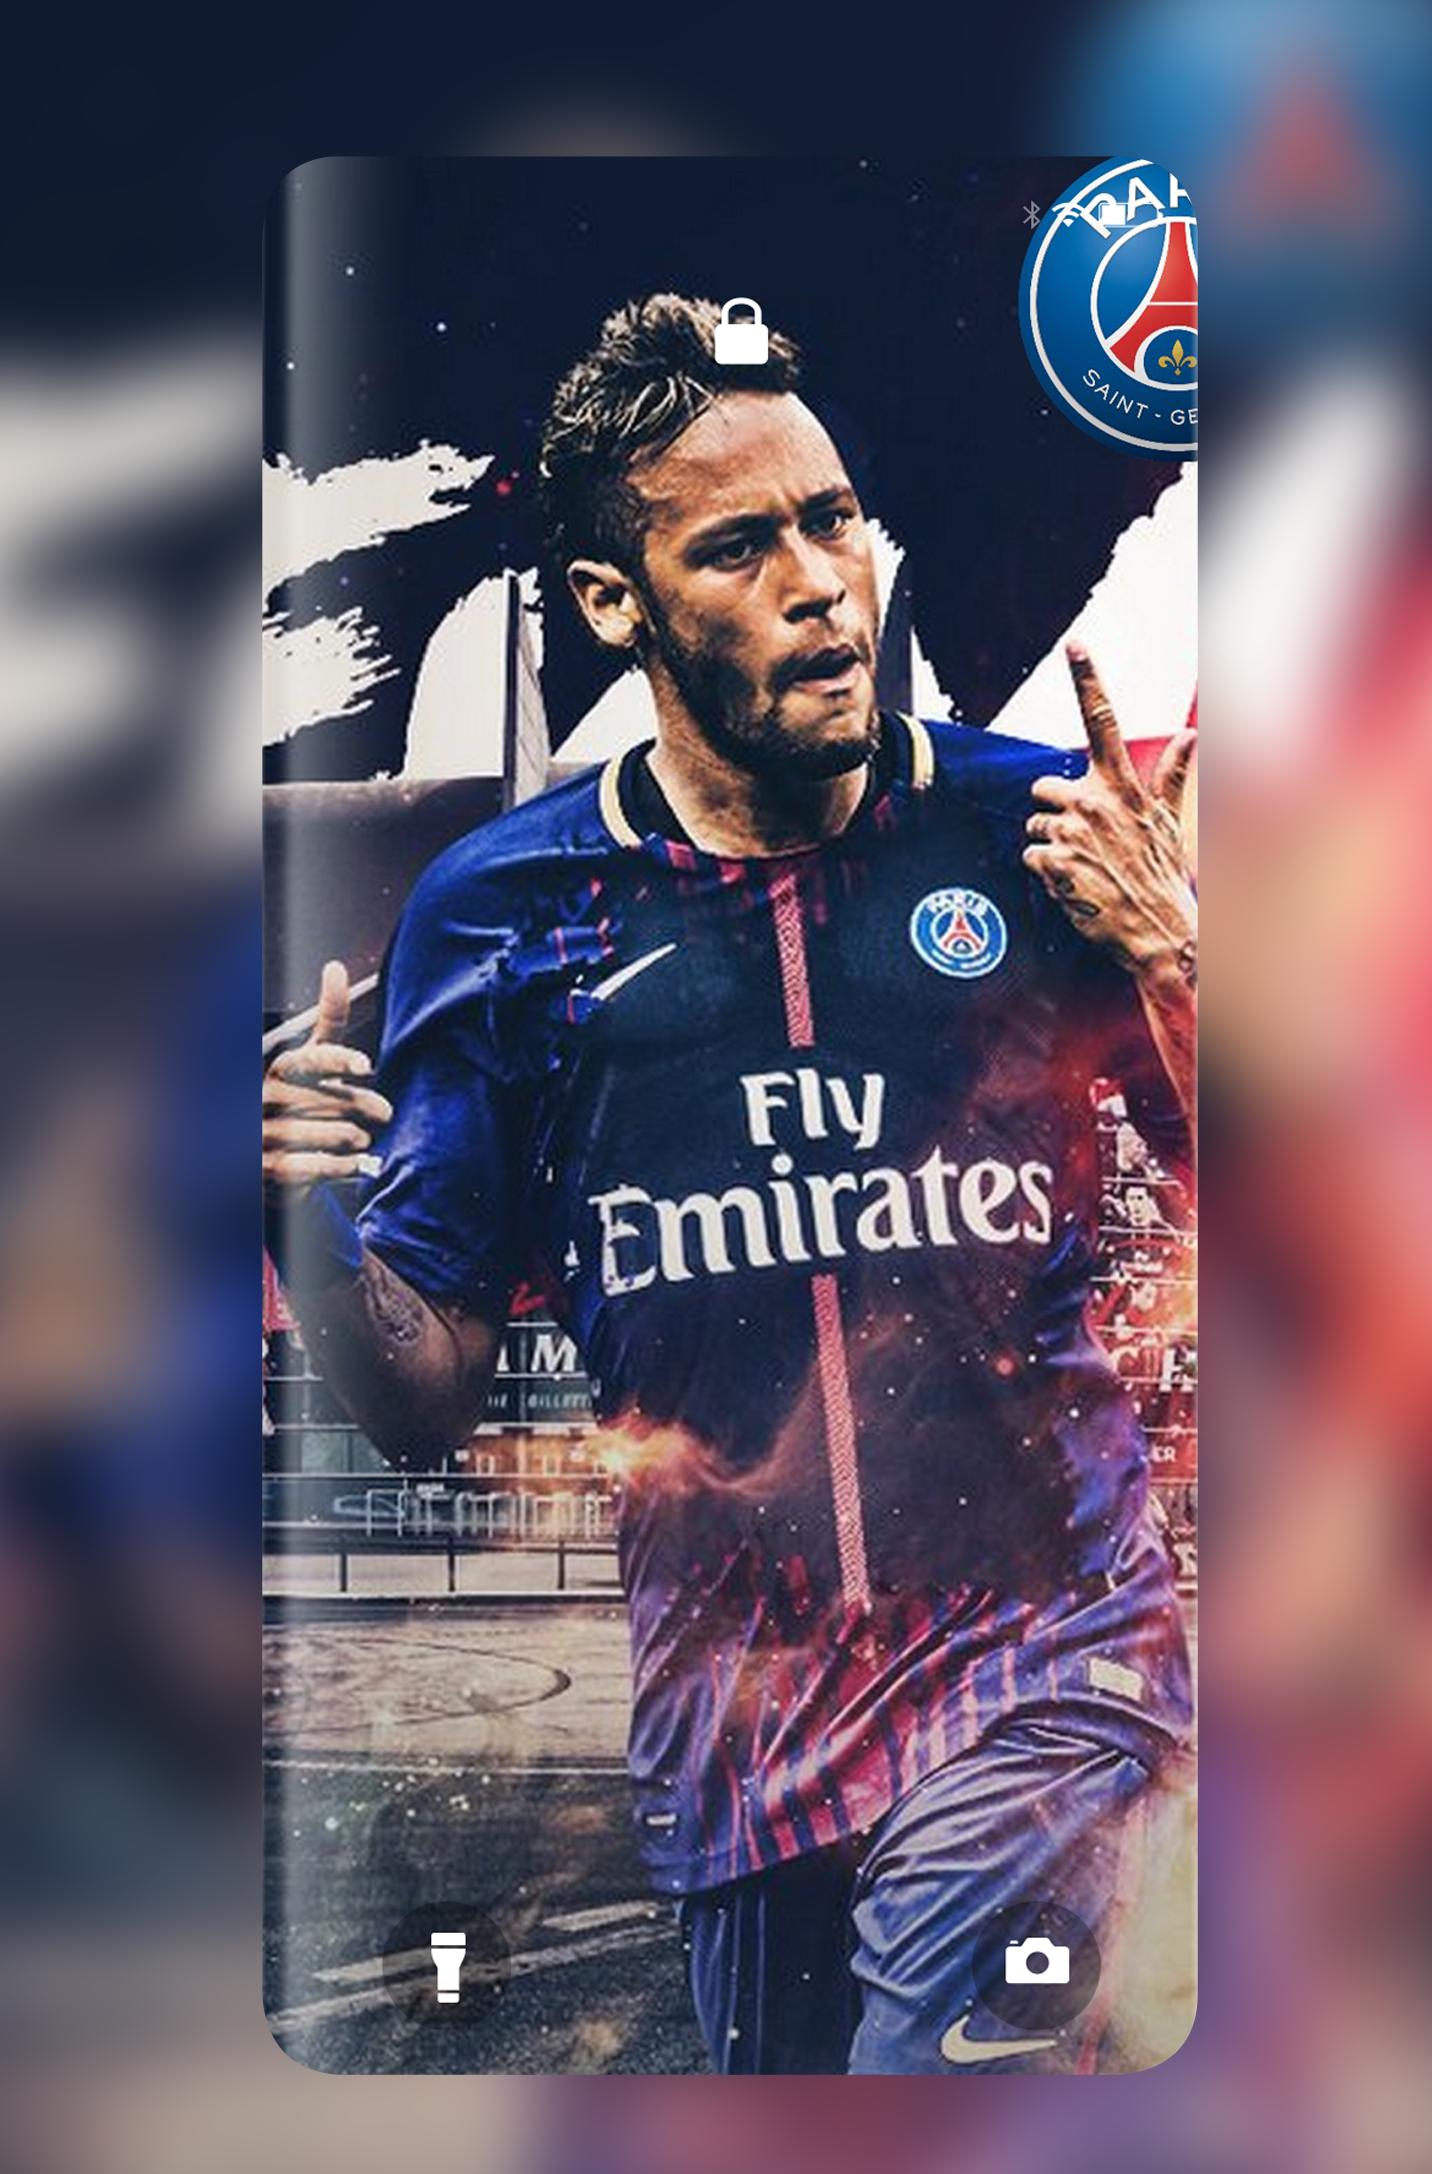 Neymar Jr Hd 4k Wallpapers 2020 For Android Apk Download